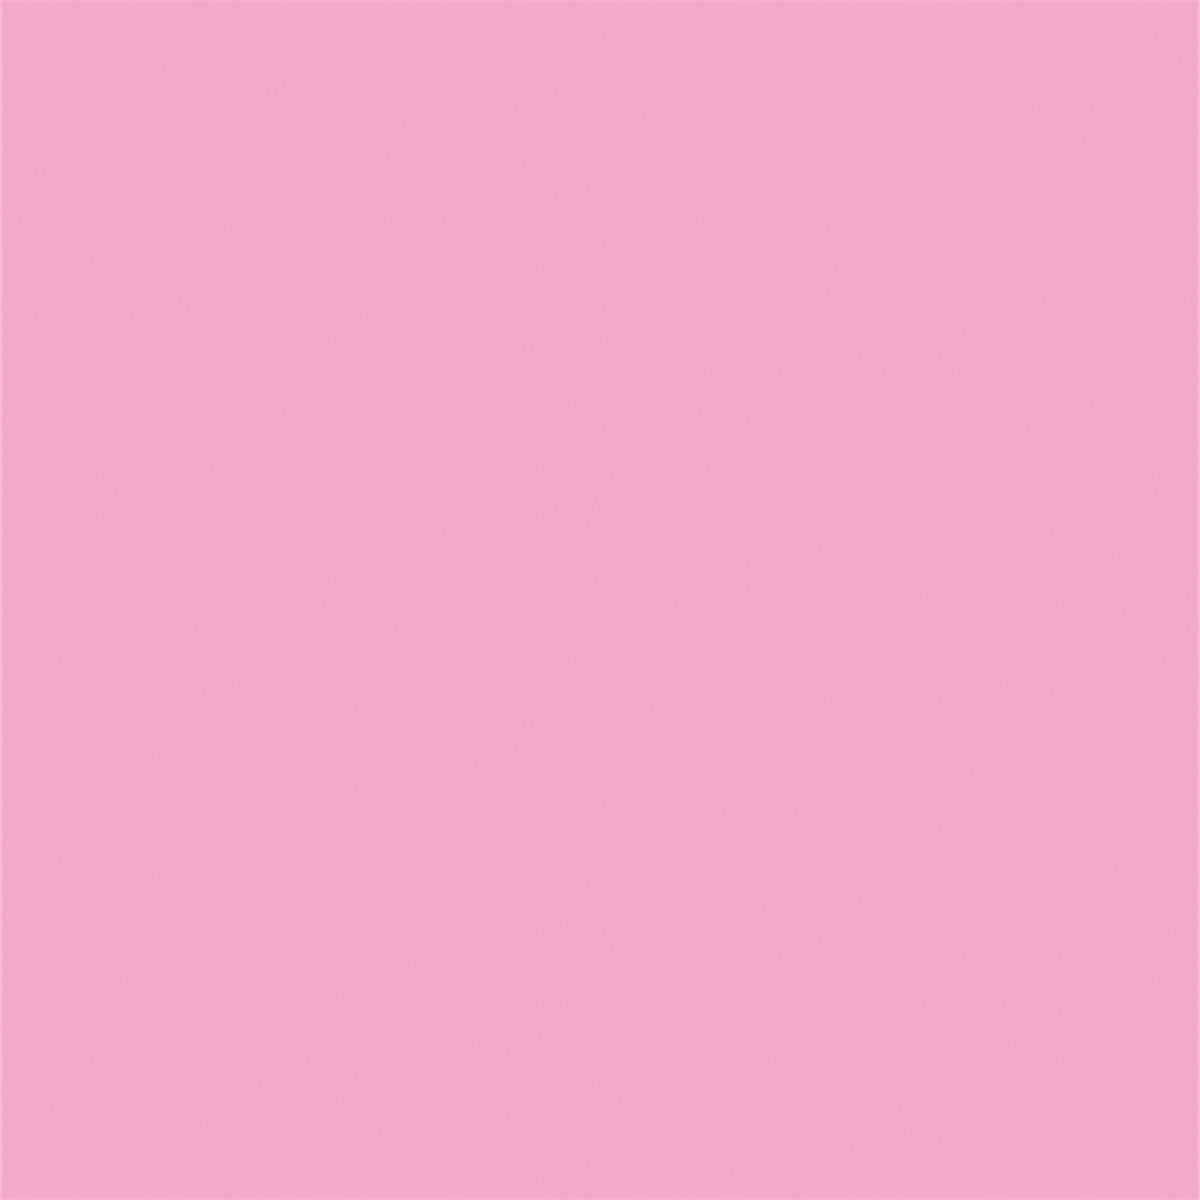 Pink Solid Portrait Photo Backdrops Seamless for Photography